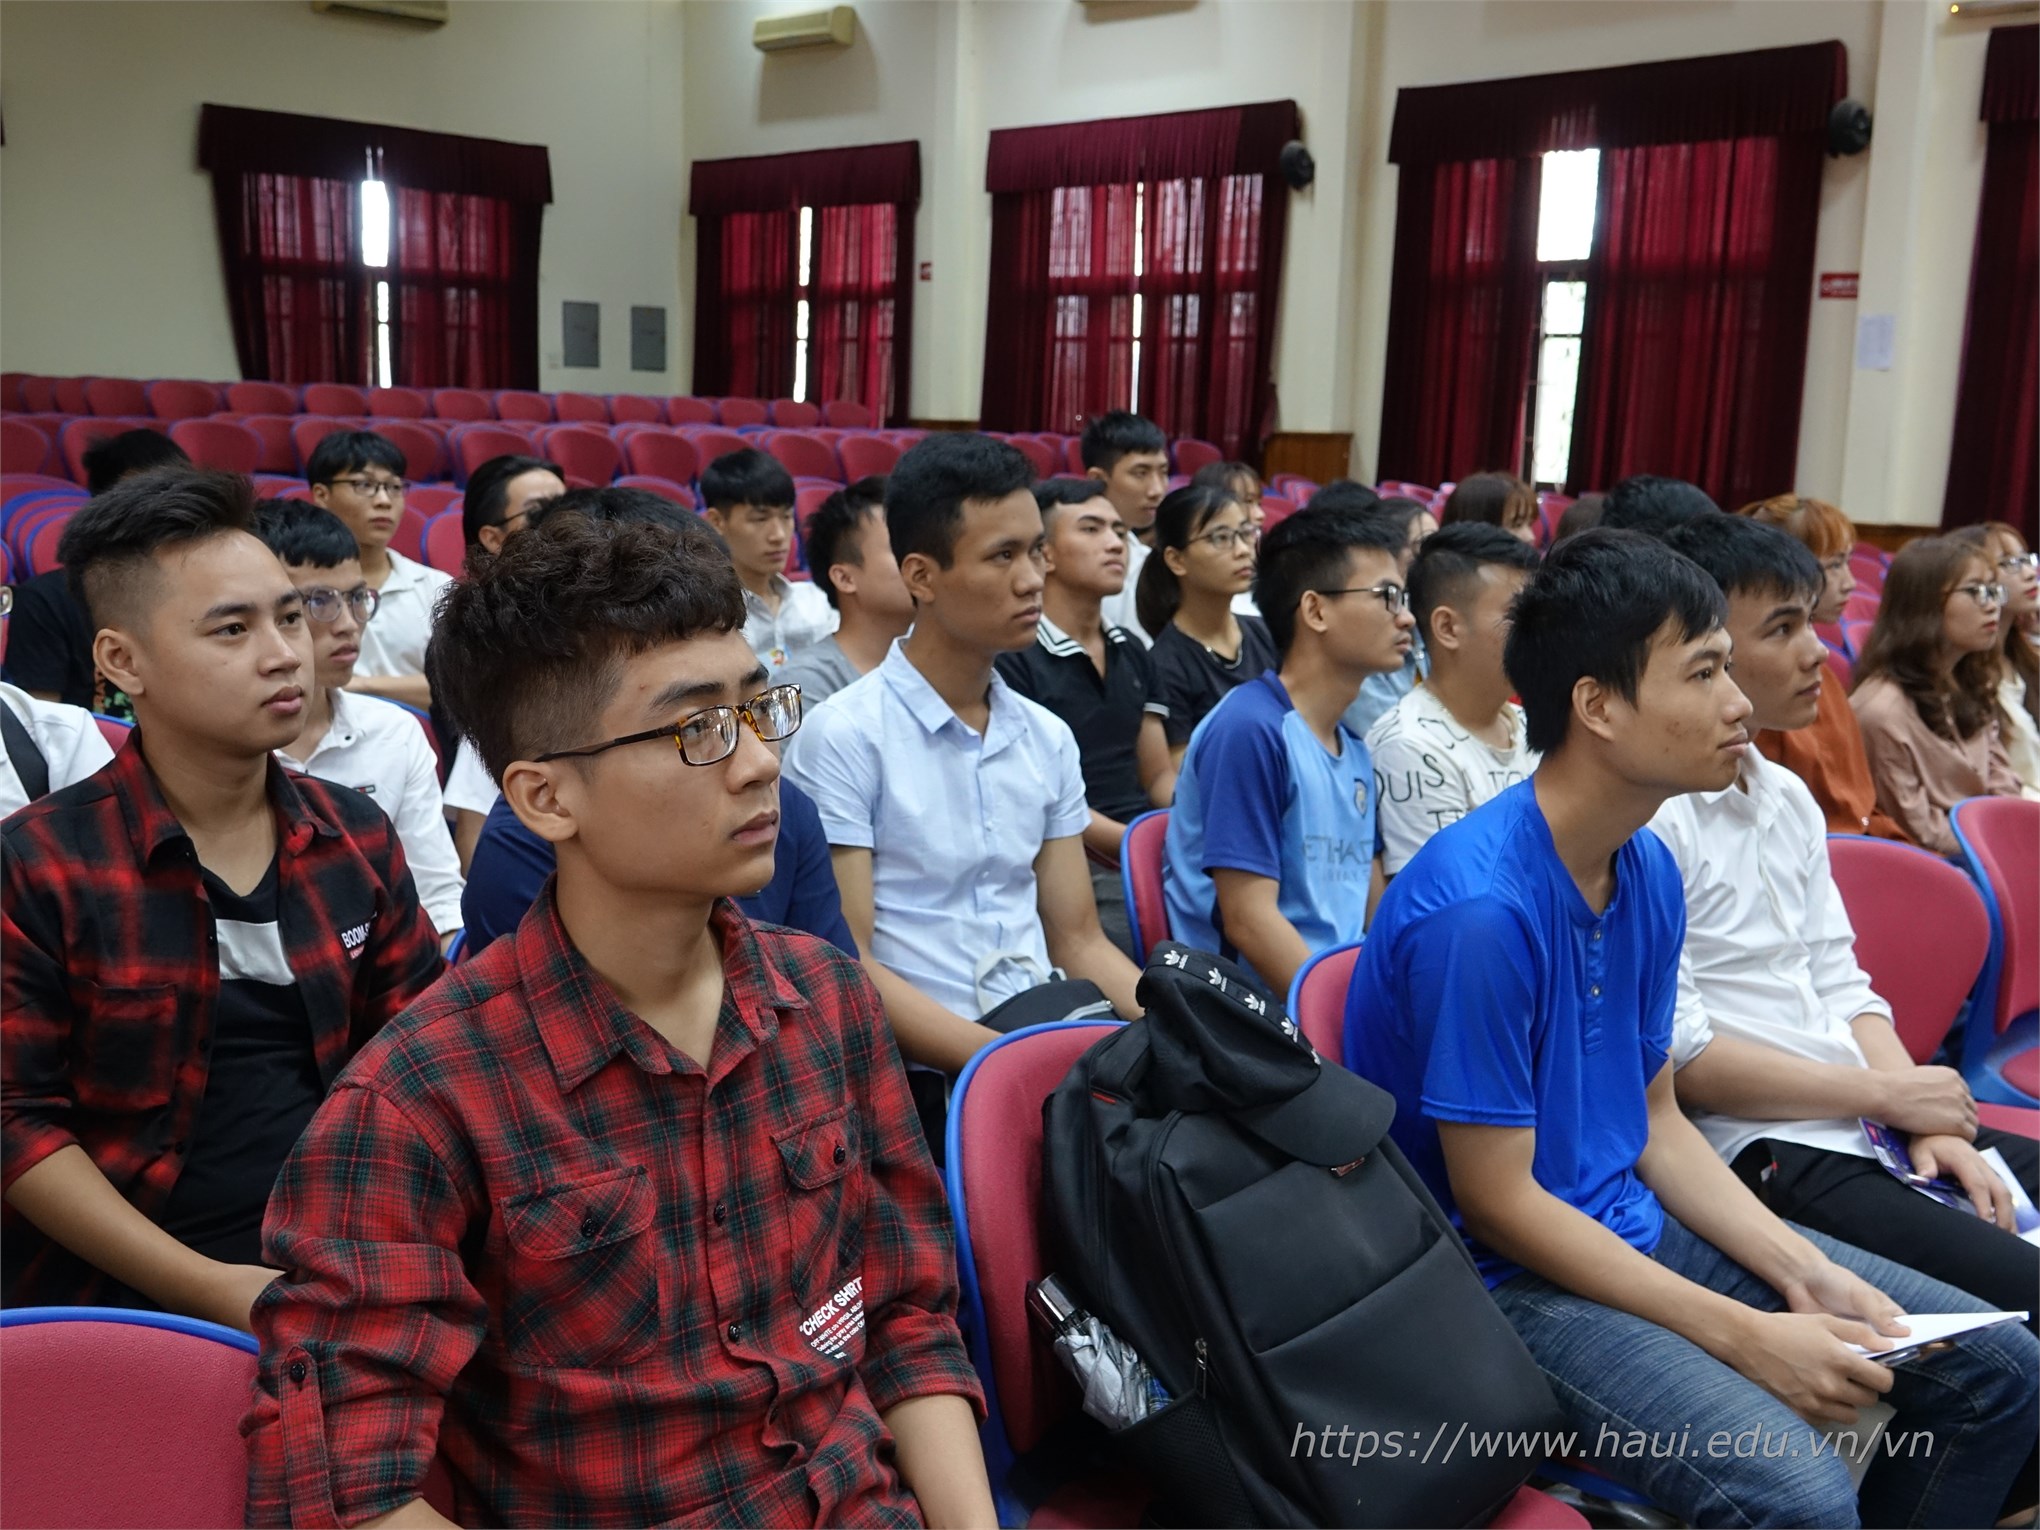 Many internship opportunities for IT and Electronics students at Toshiba Vietnam